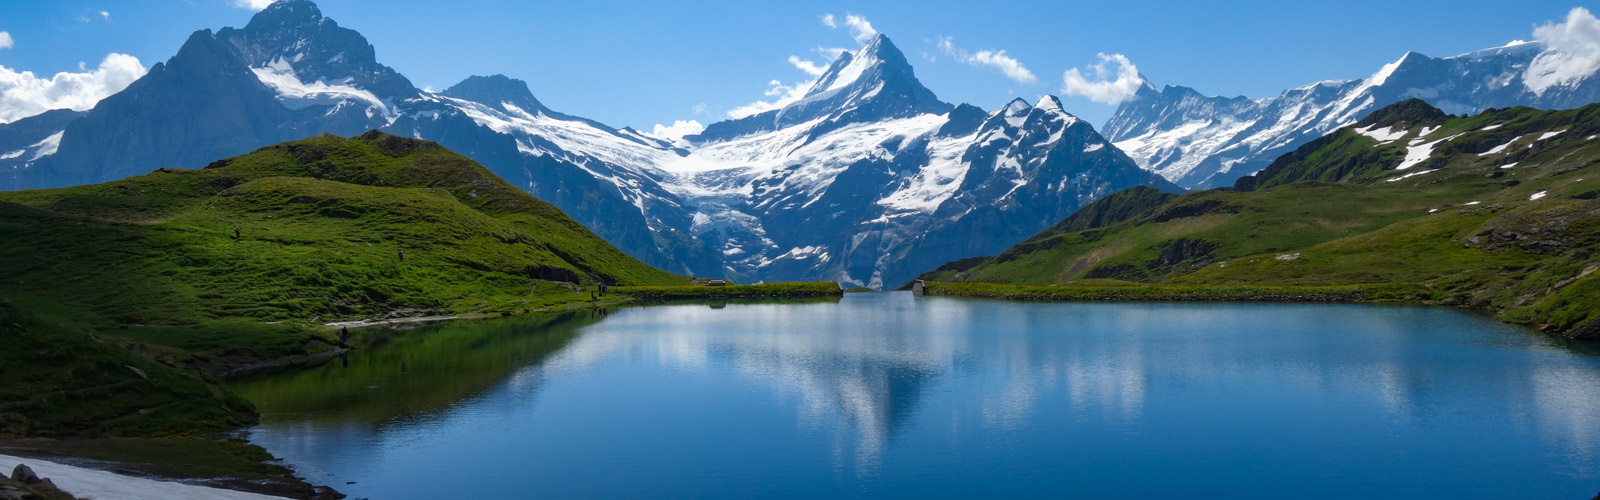 Ultimate Guide to the Jungfrau Region of Switzerland: My Favorite Place on Earth